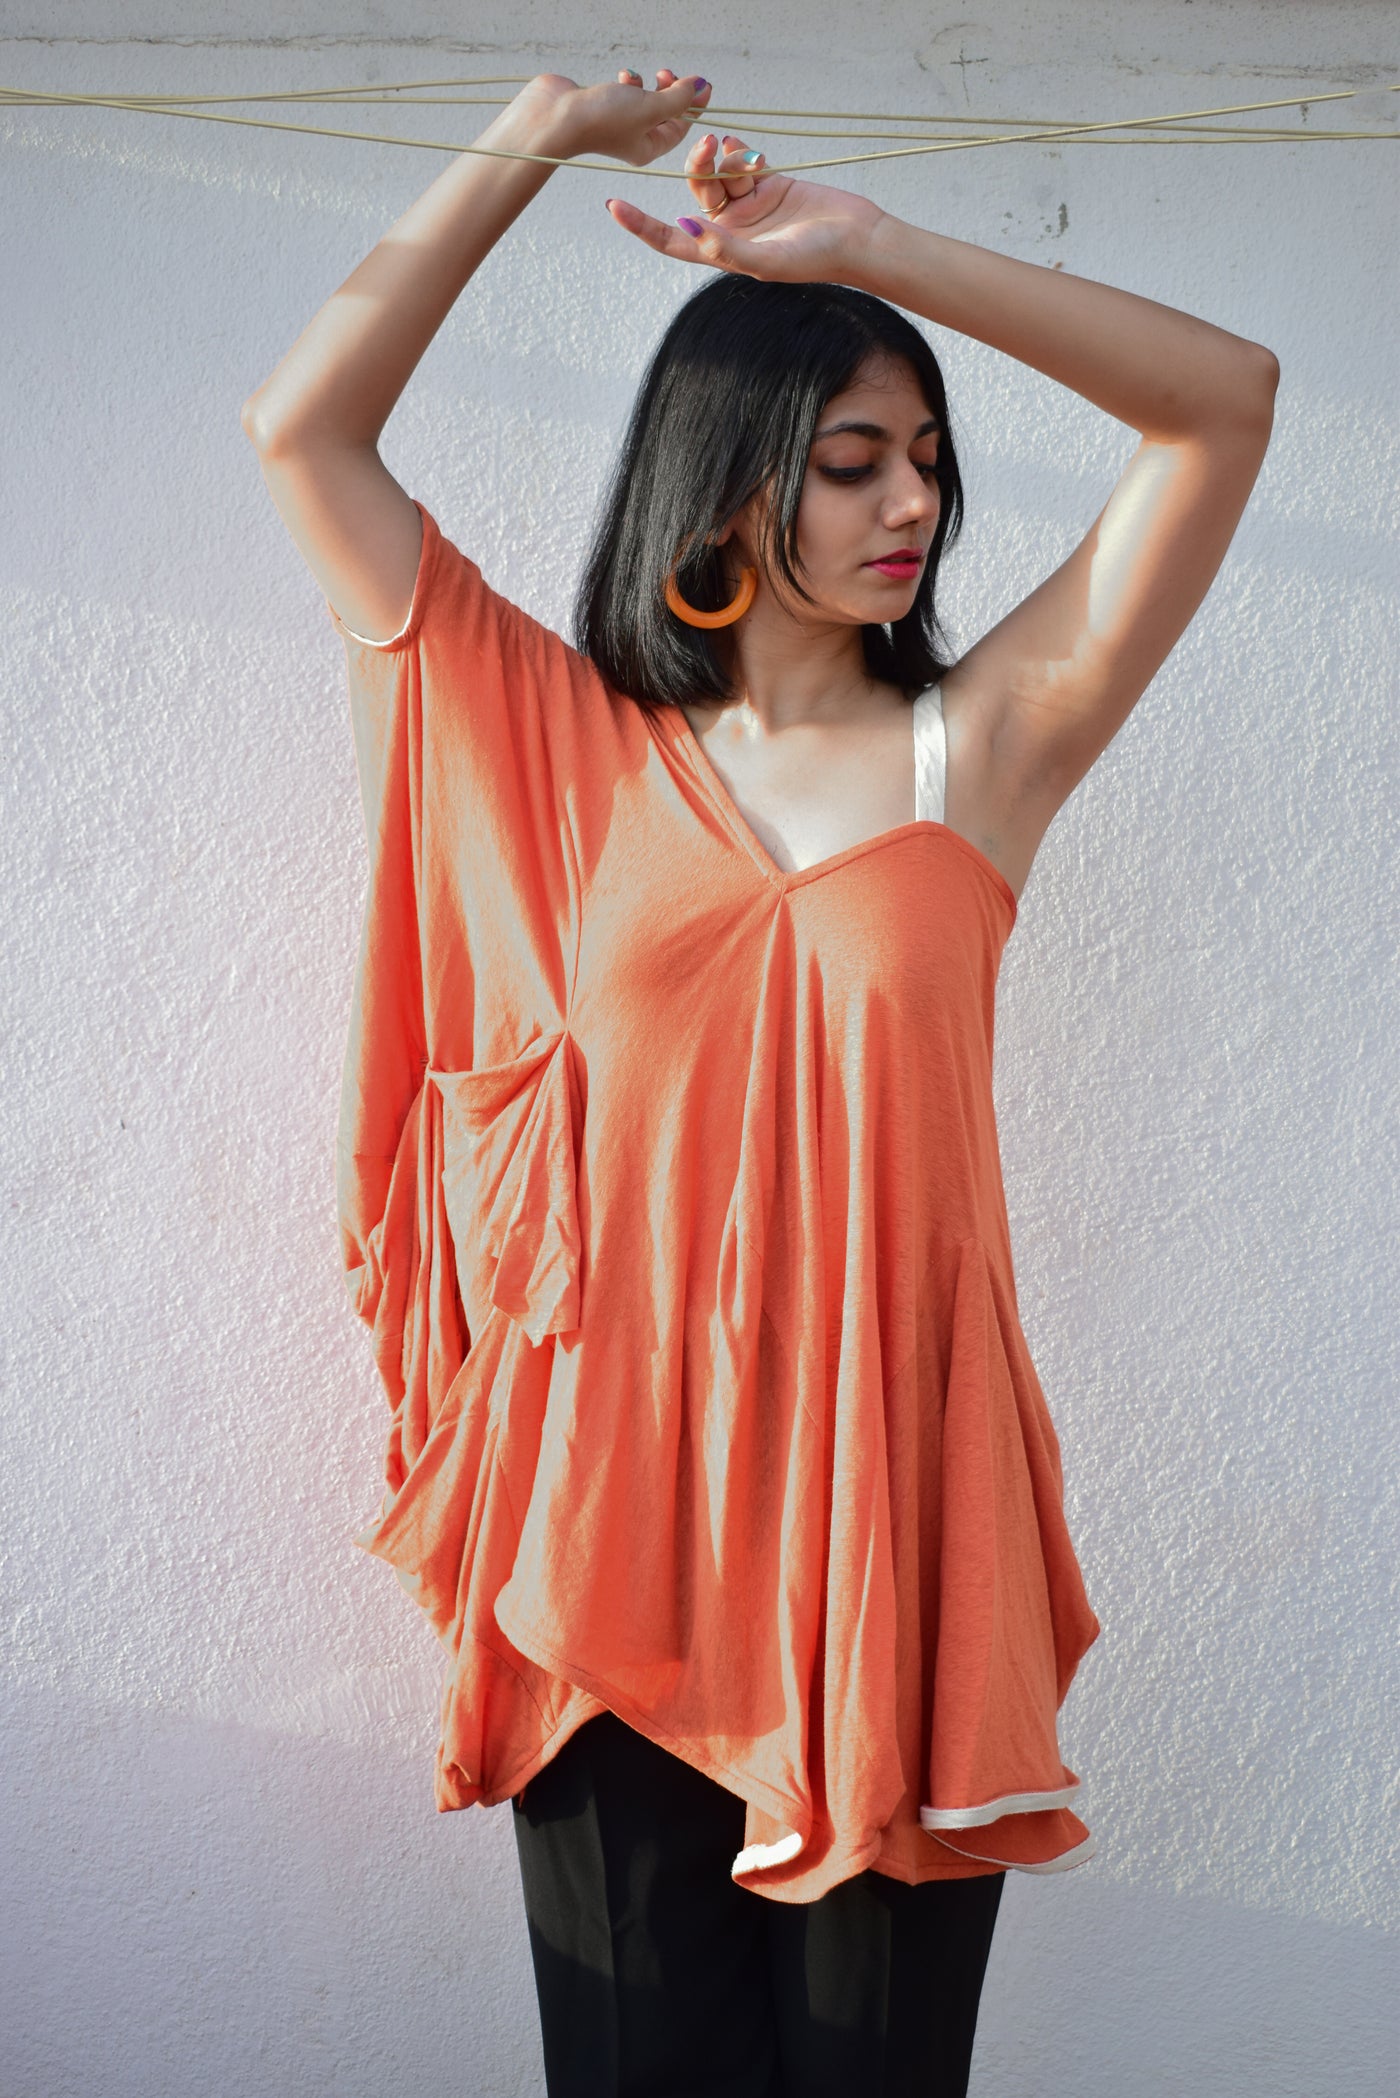 A bright Orange top with one puffed sleeve and one simple strap